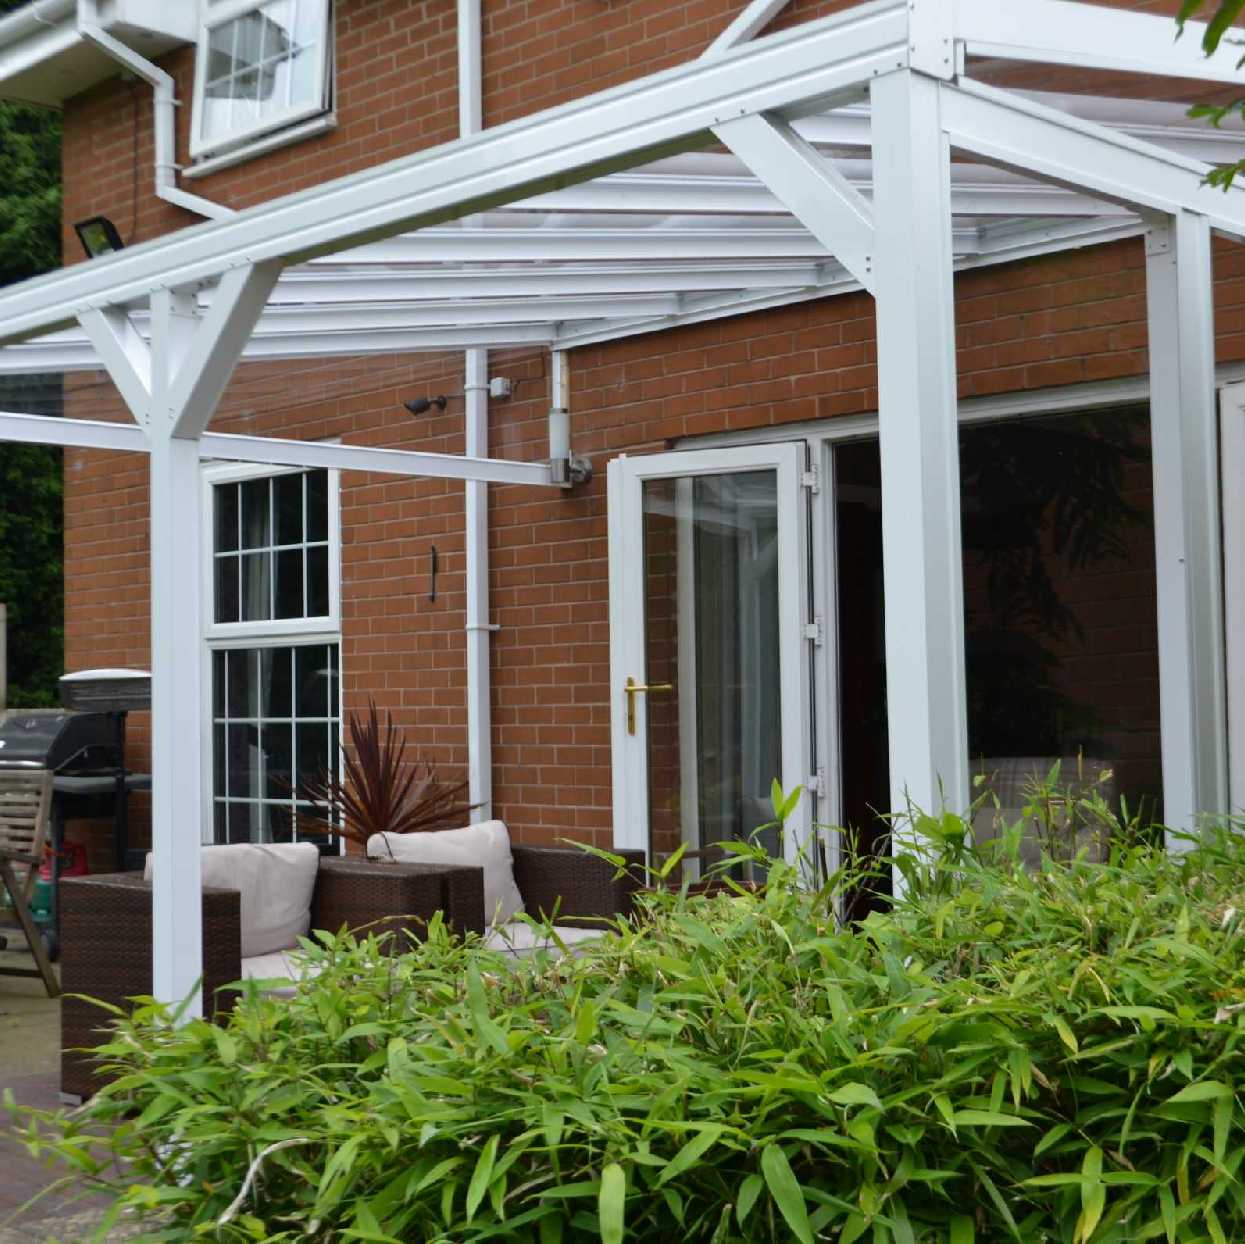 Omega Smart Lean-To Canopy, White UNGLAZED for 6mm Glazing - 6.3m (W) x 1.5m (P), (4) Supporting Posts from Omega Build